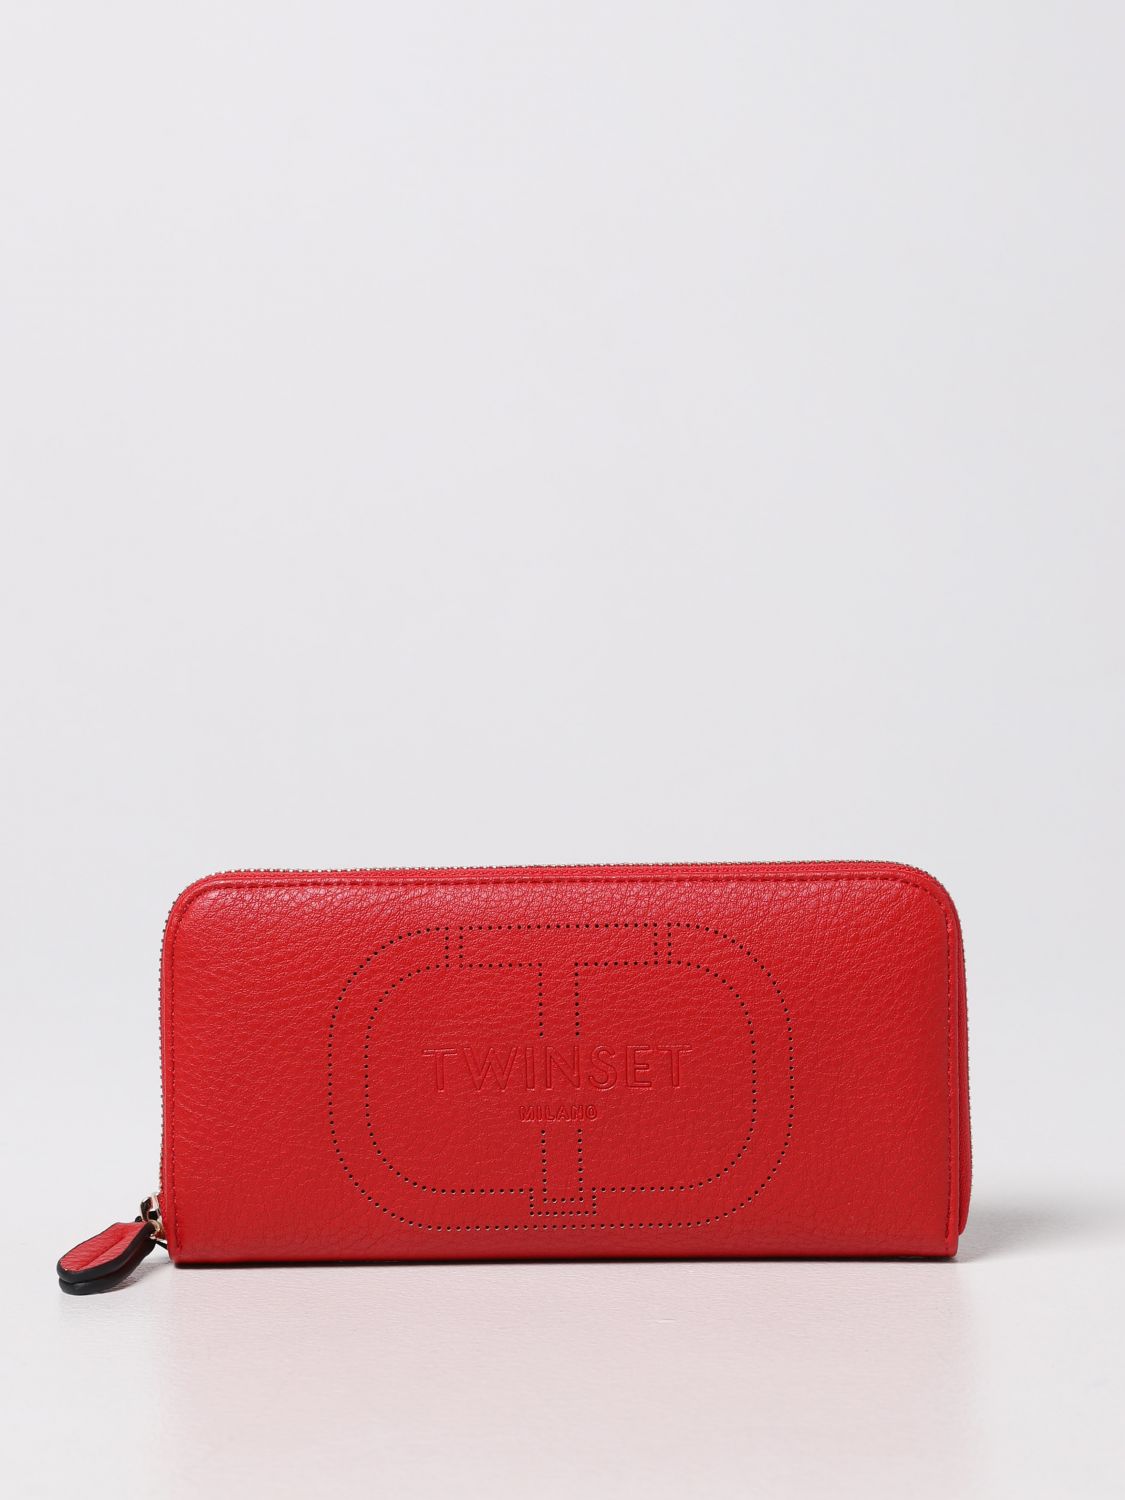 Wallet Twinset: Twinset continental wallet with logo red 1